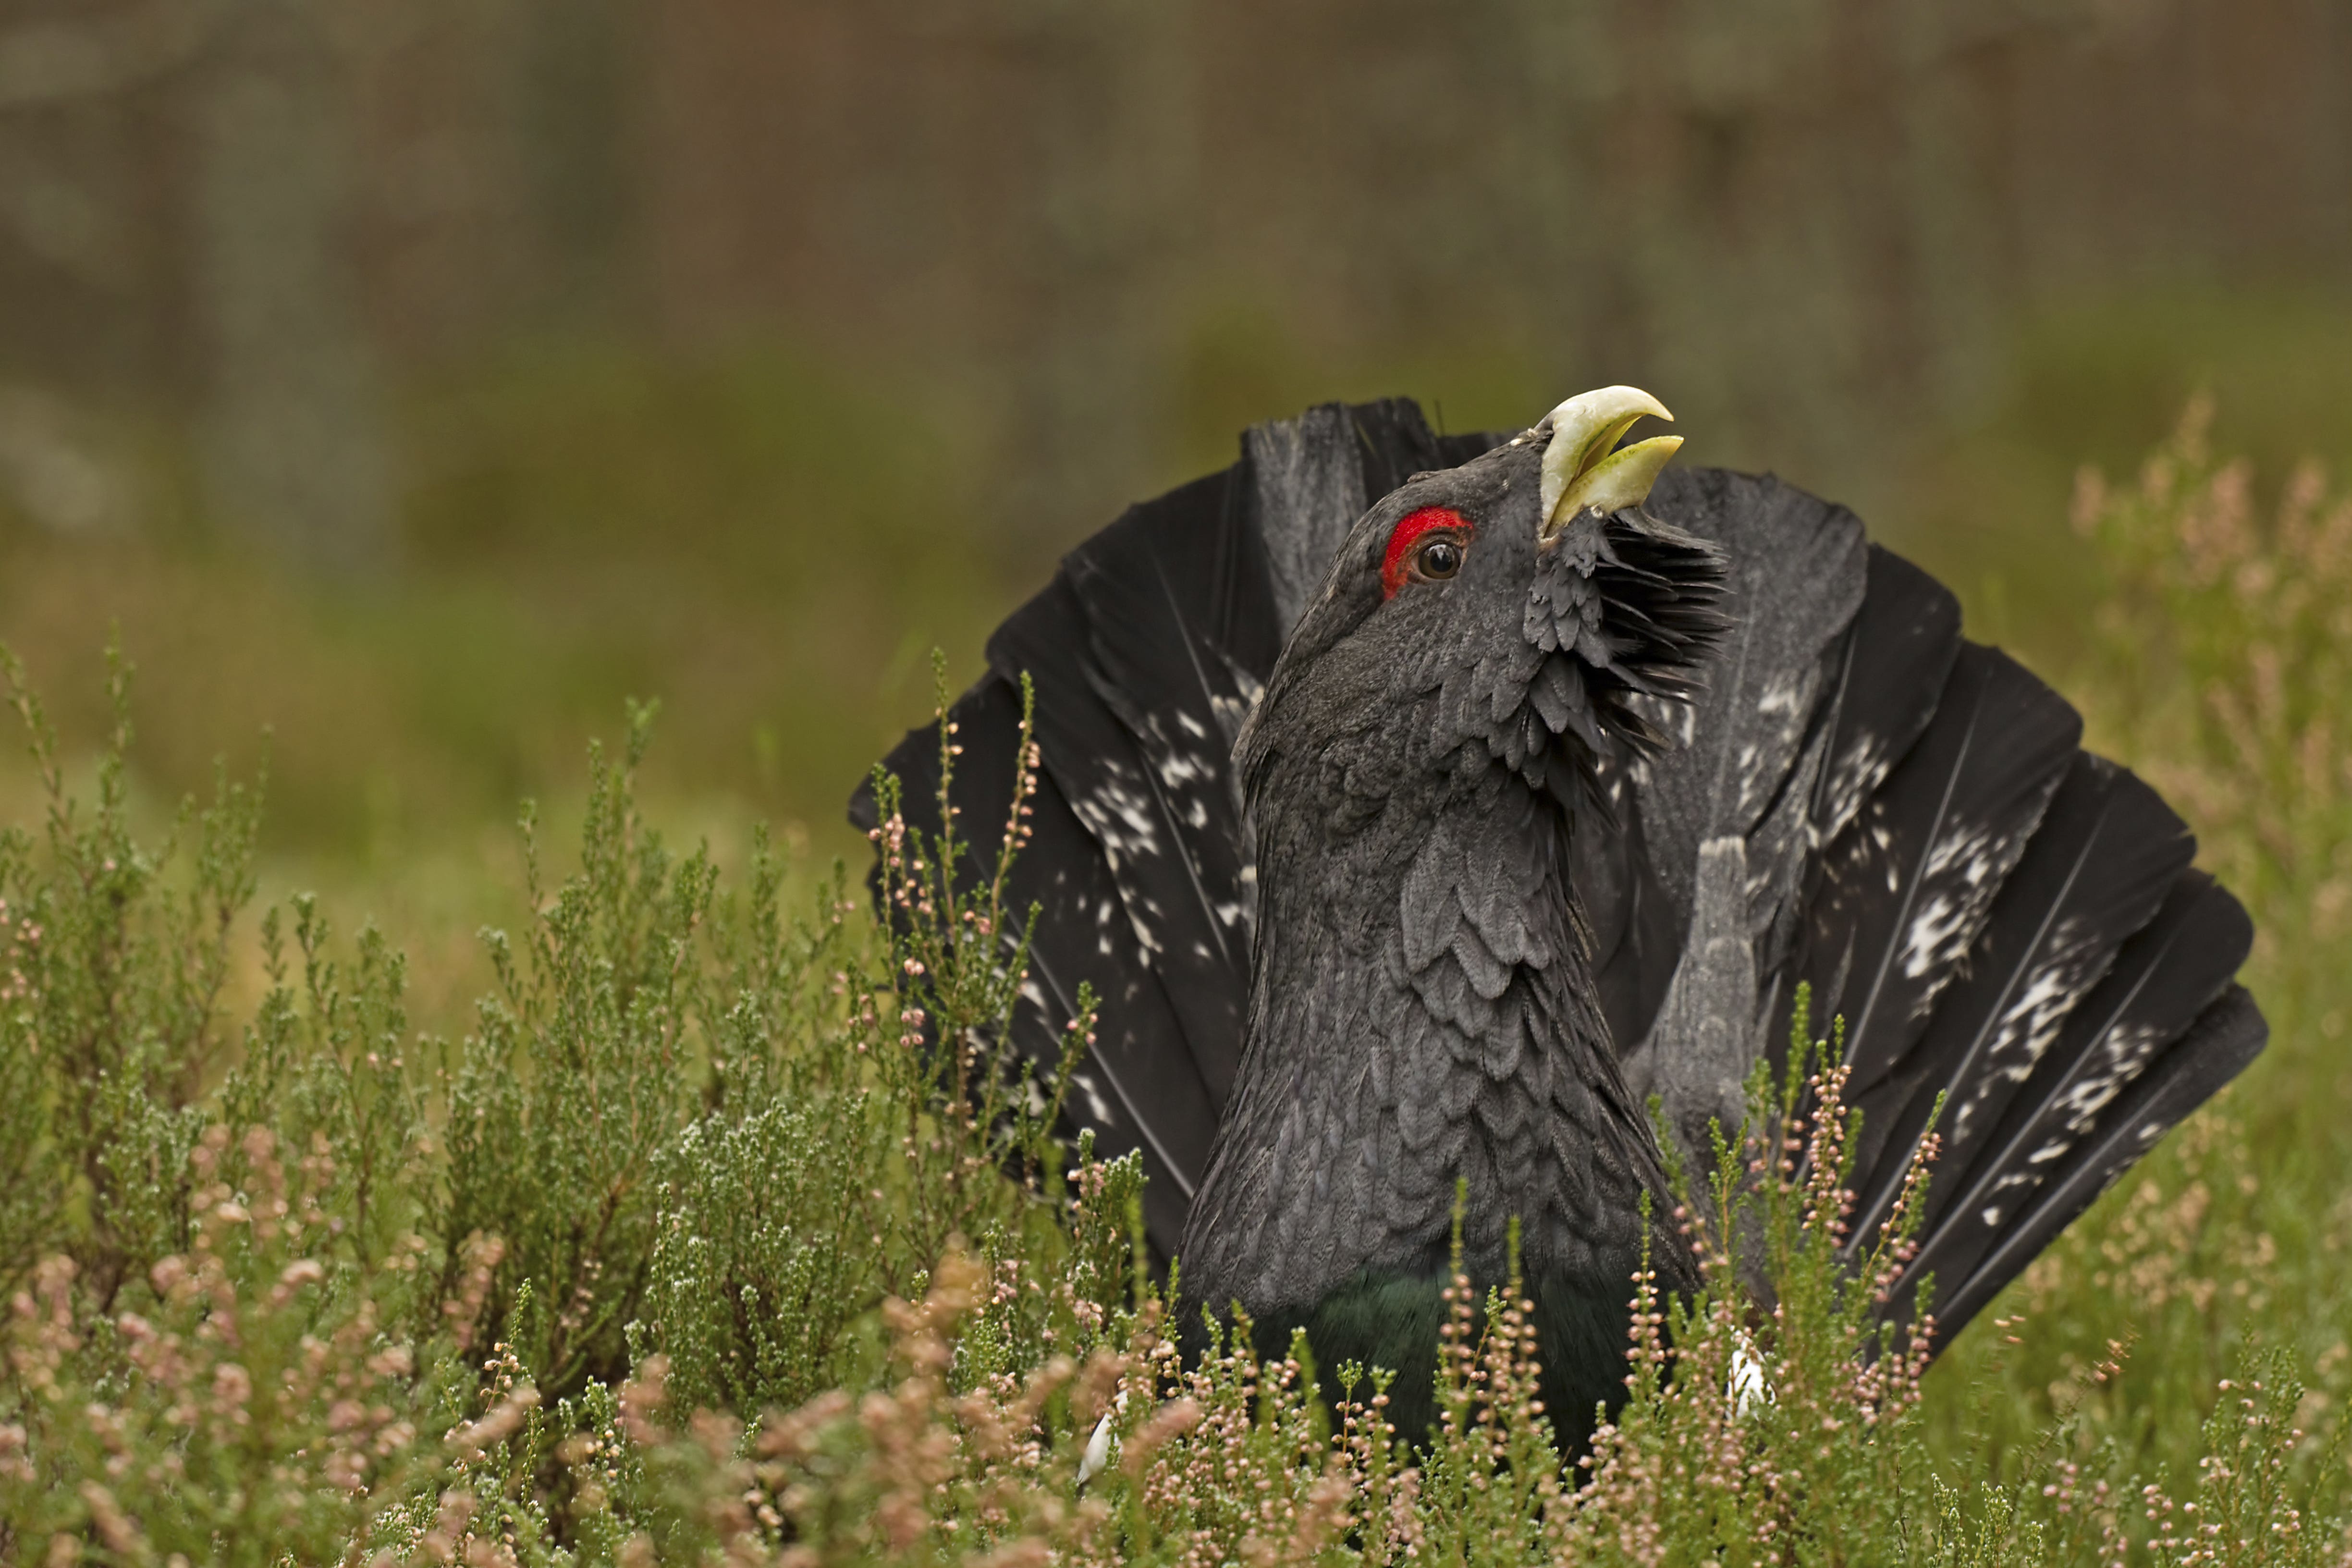 It is believed there are only around 500 capercaillie left in the wild in the UK (PA)